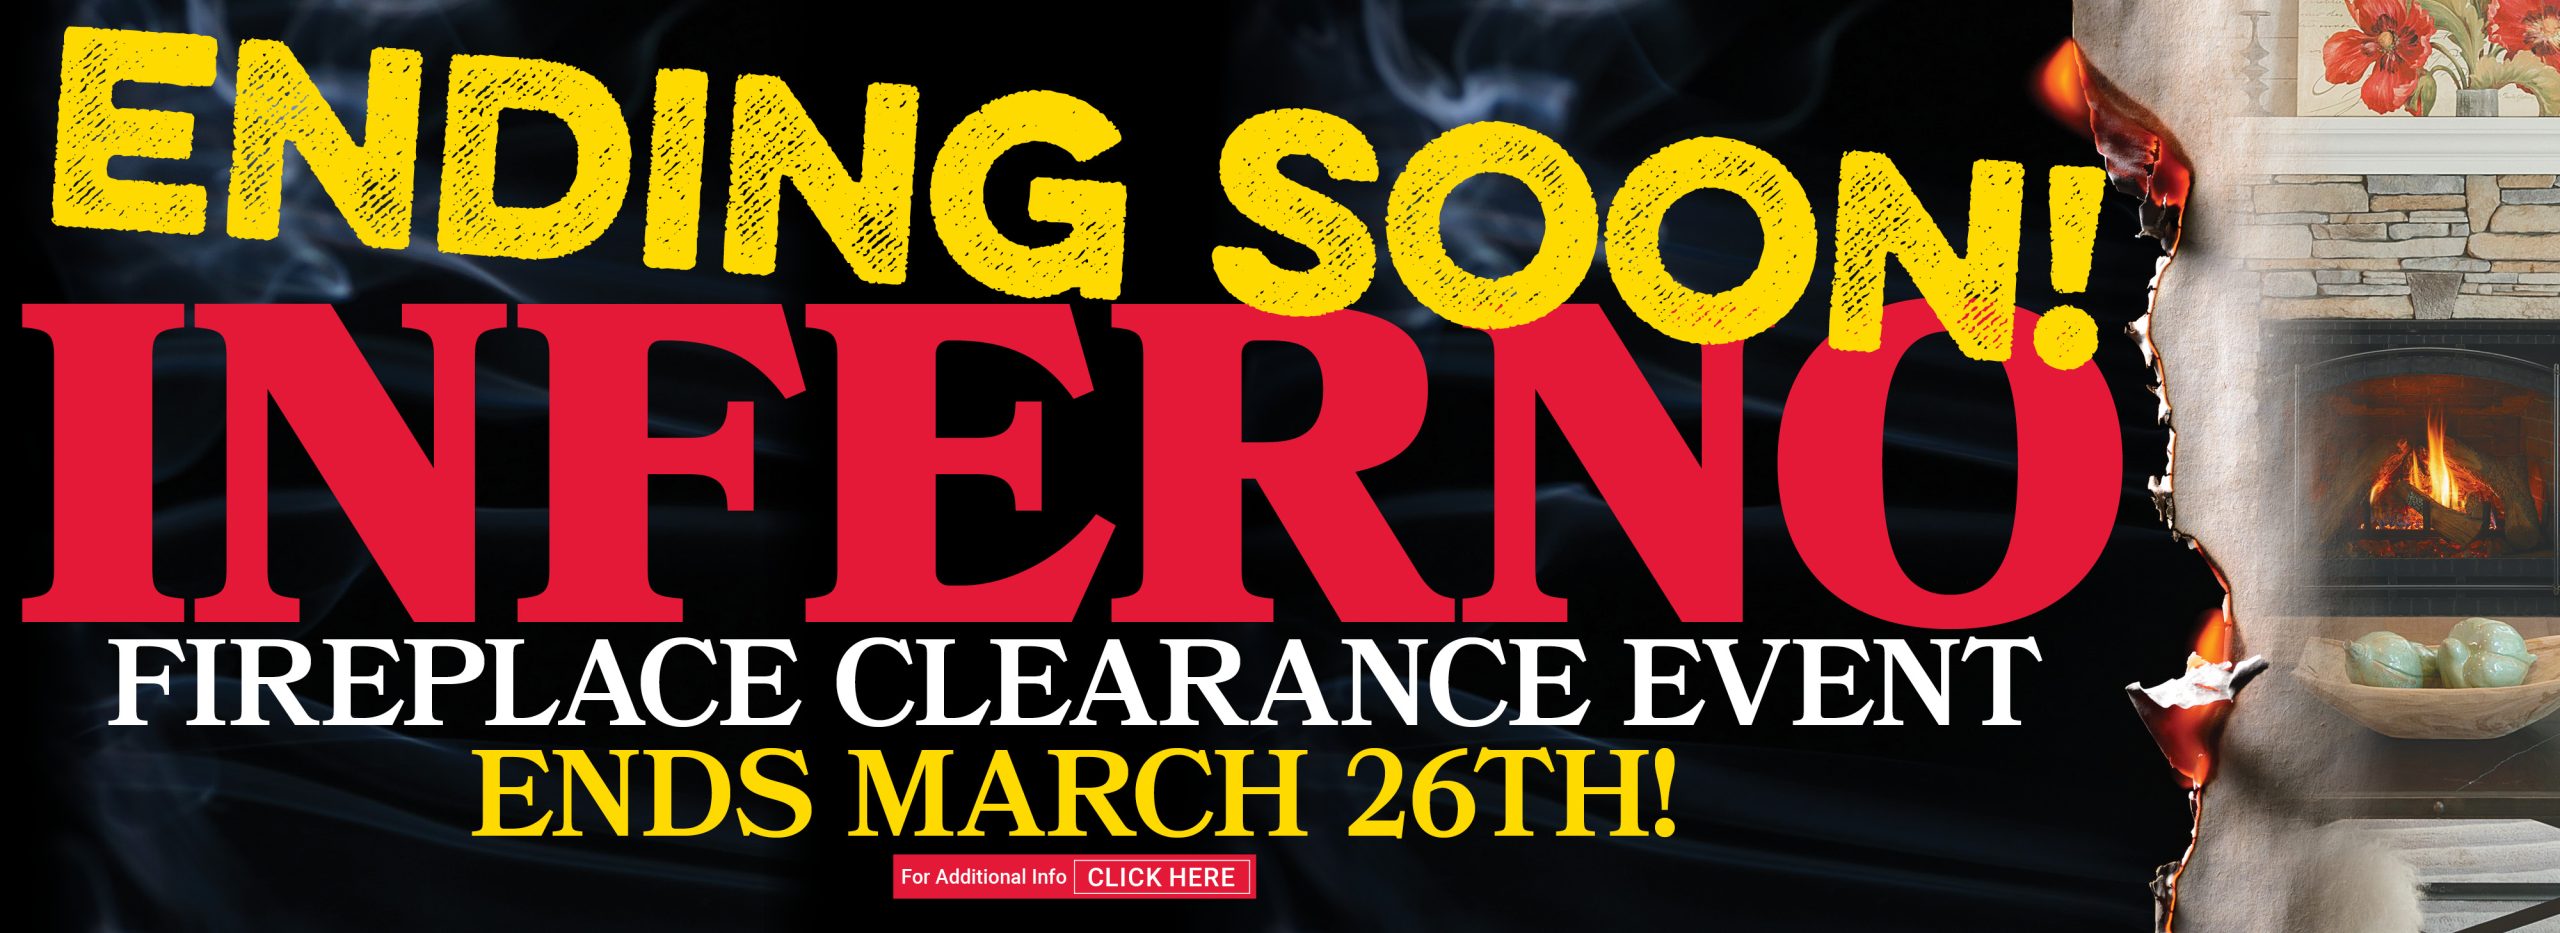 INFERNO EVENT BANNERS3